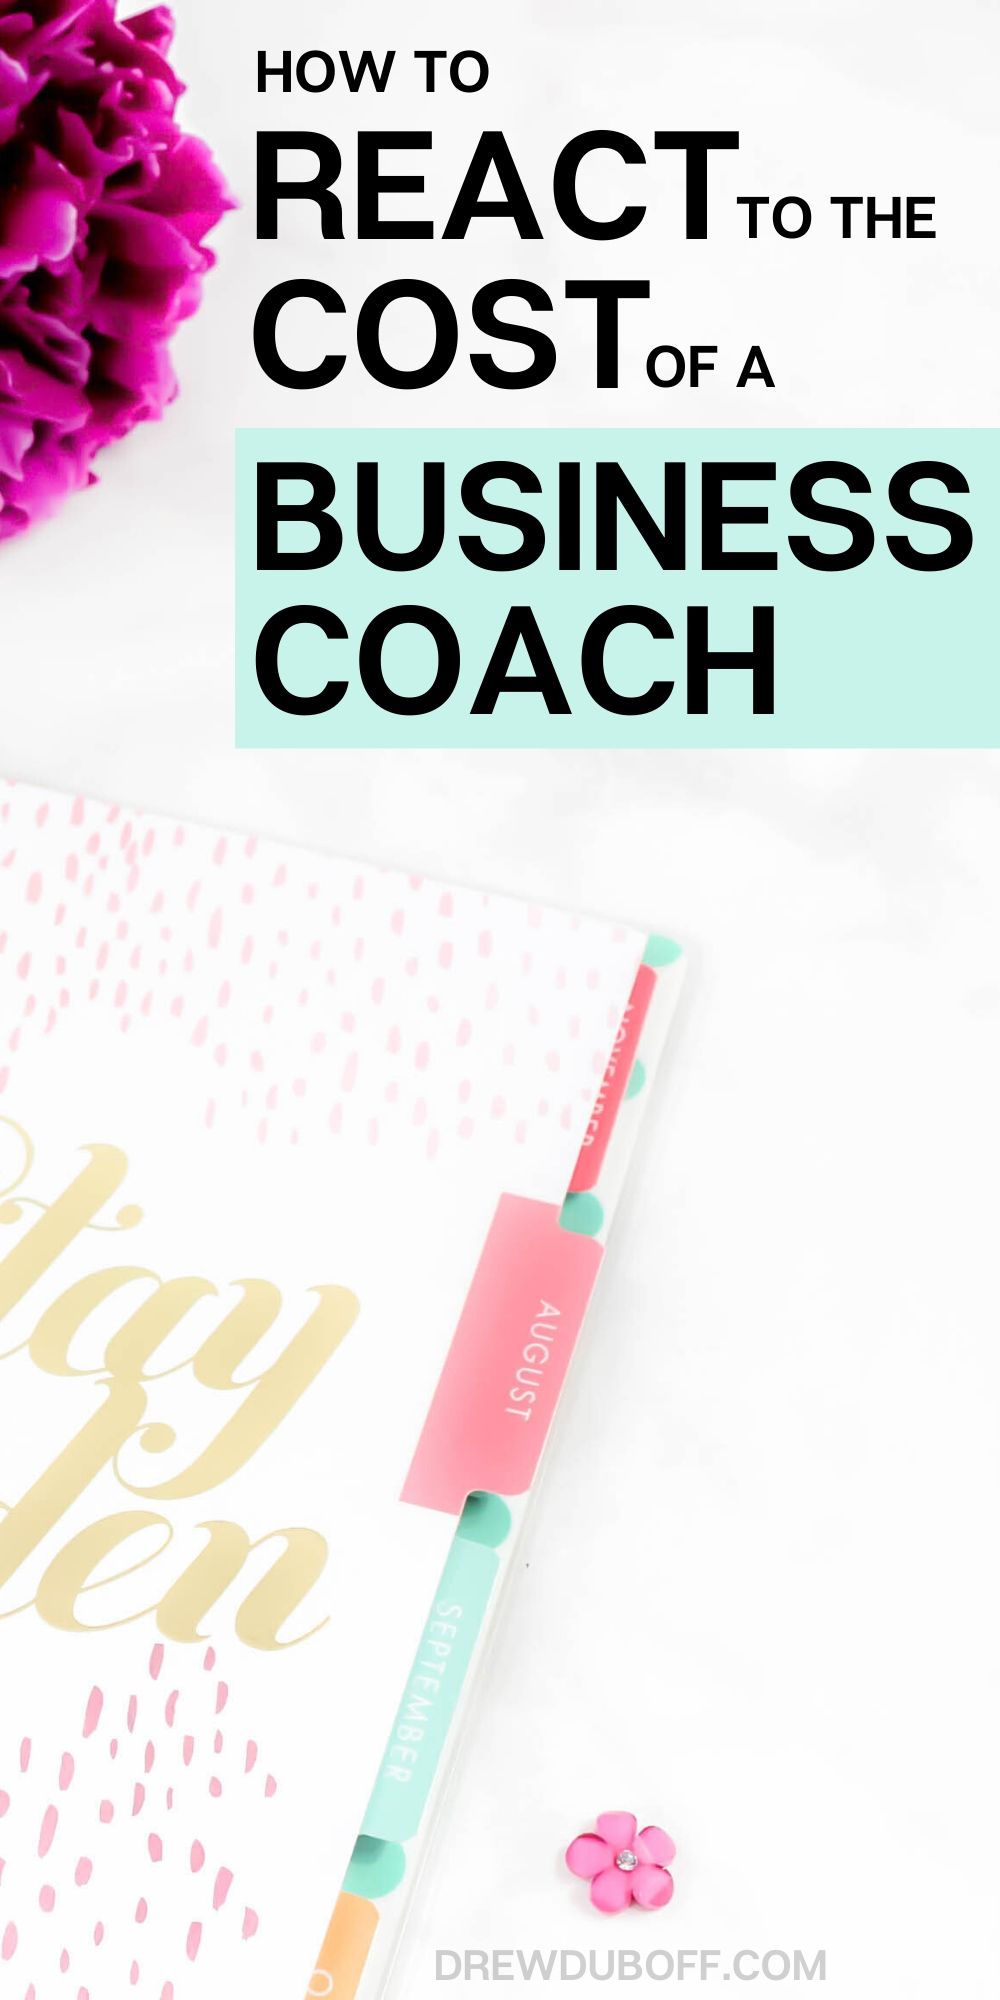 How to React to the Cost of a Business Coach